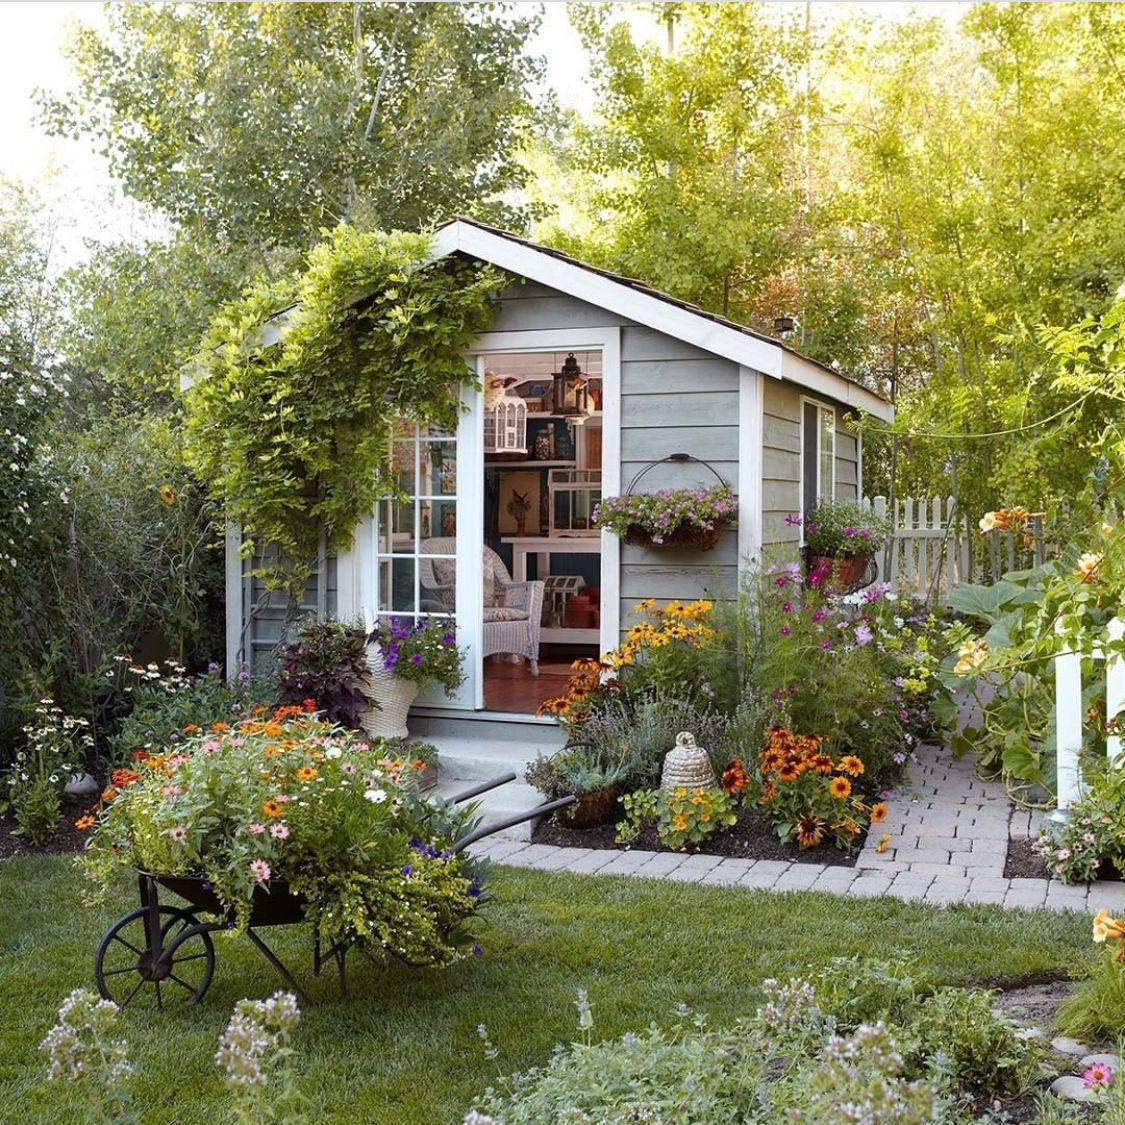 Creative Ways to Spruce Up Your Garden Shed